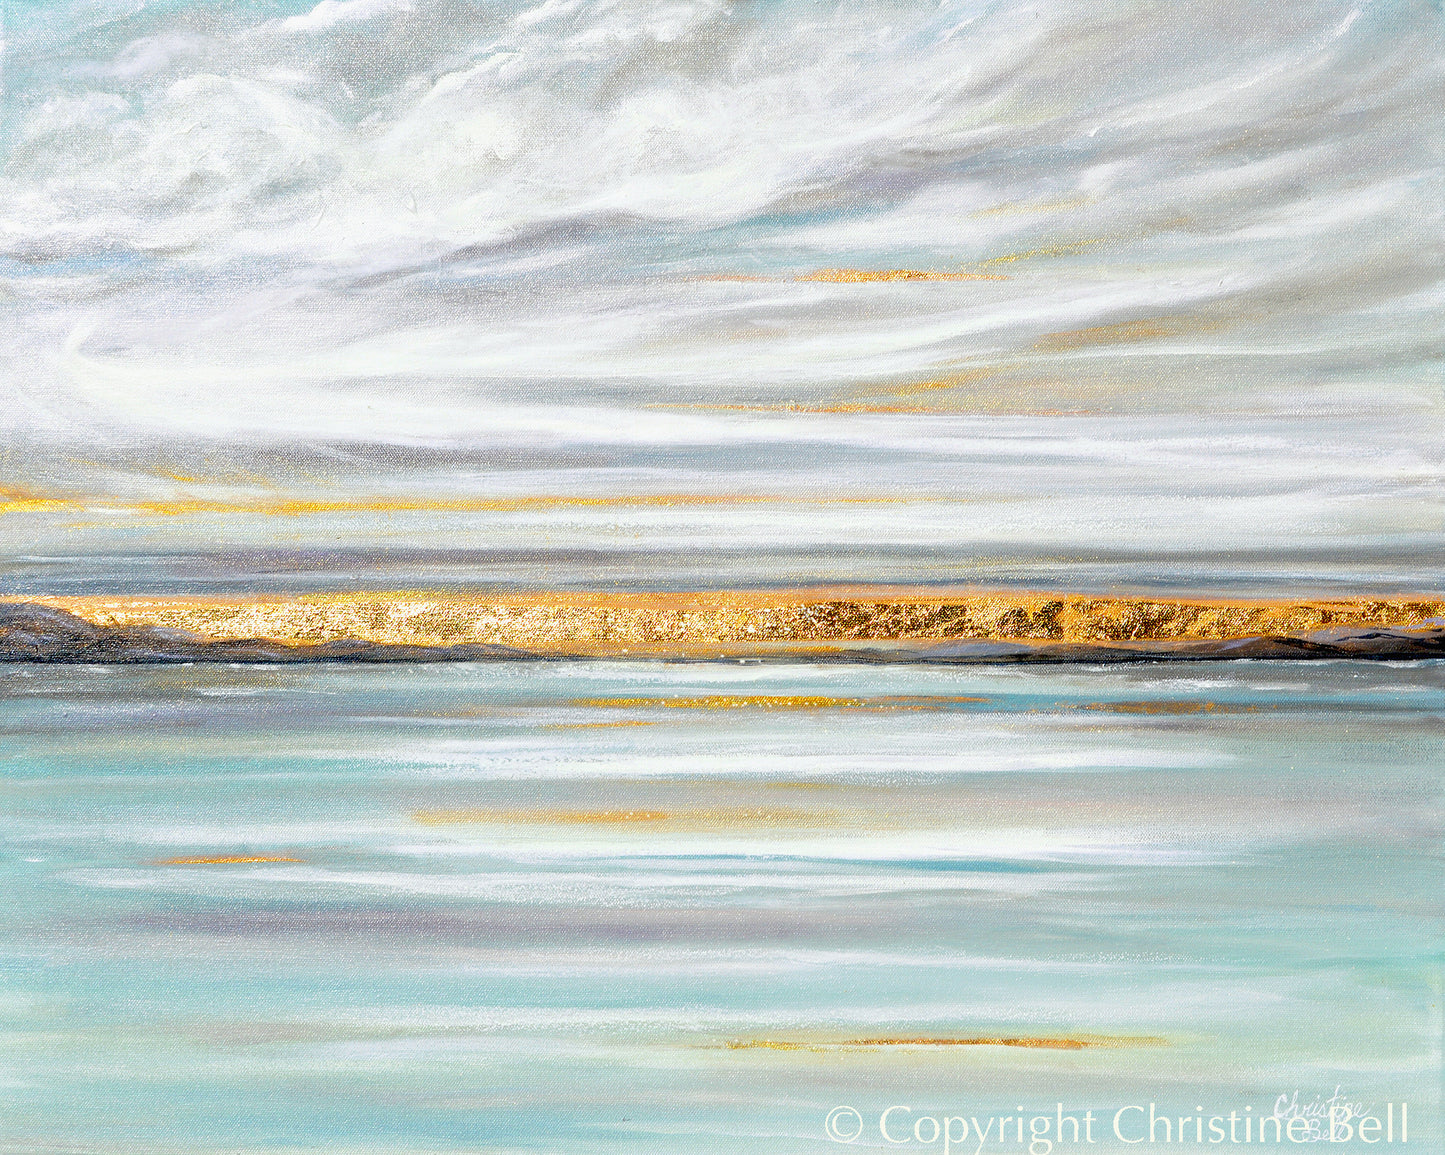 "Sunlight's Poetry" ORIGINAL Oil Painting, Seascape with Gold Leaf, 30x24"